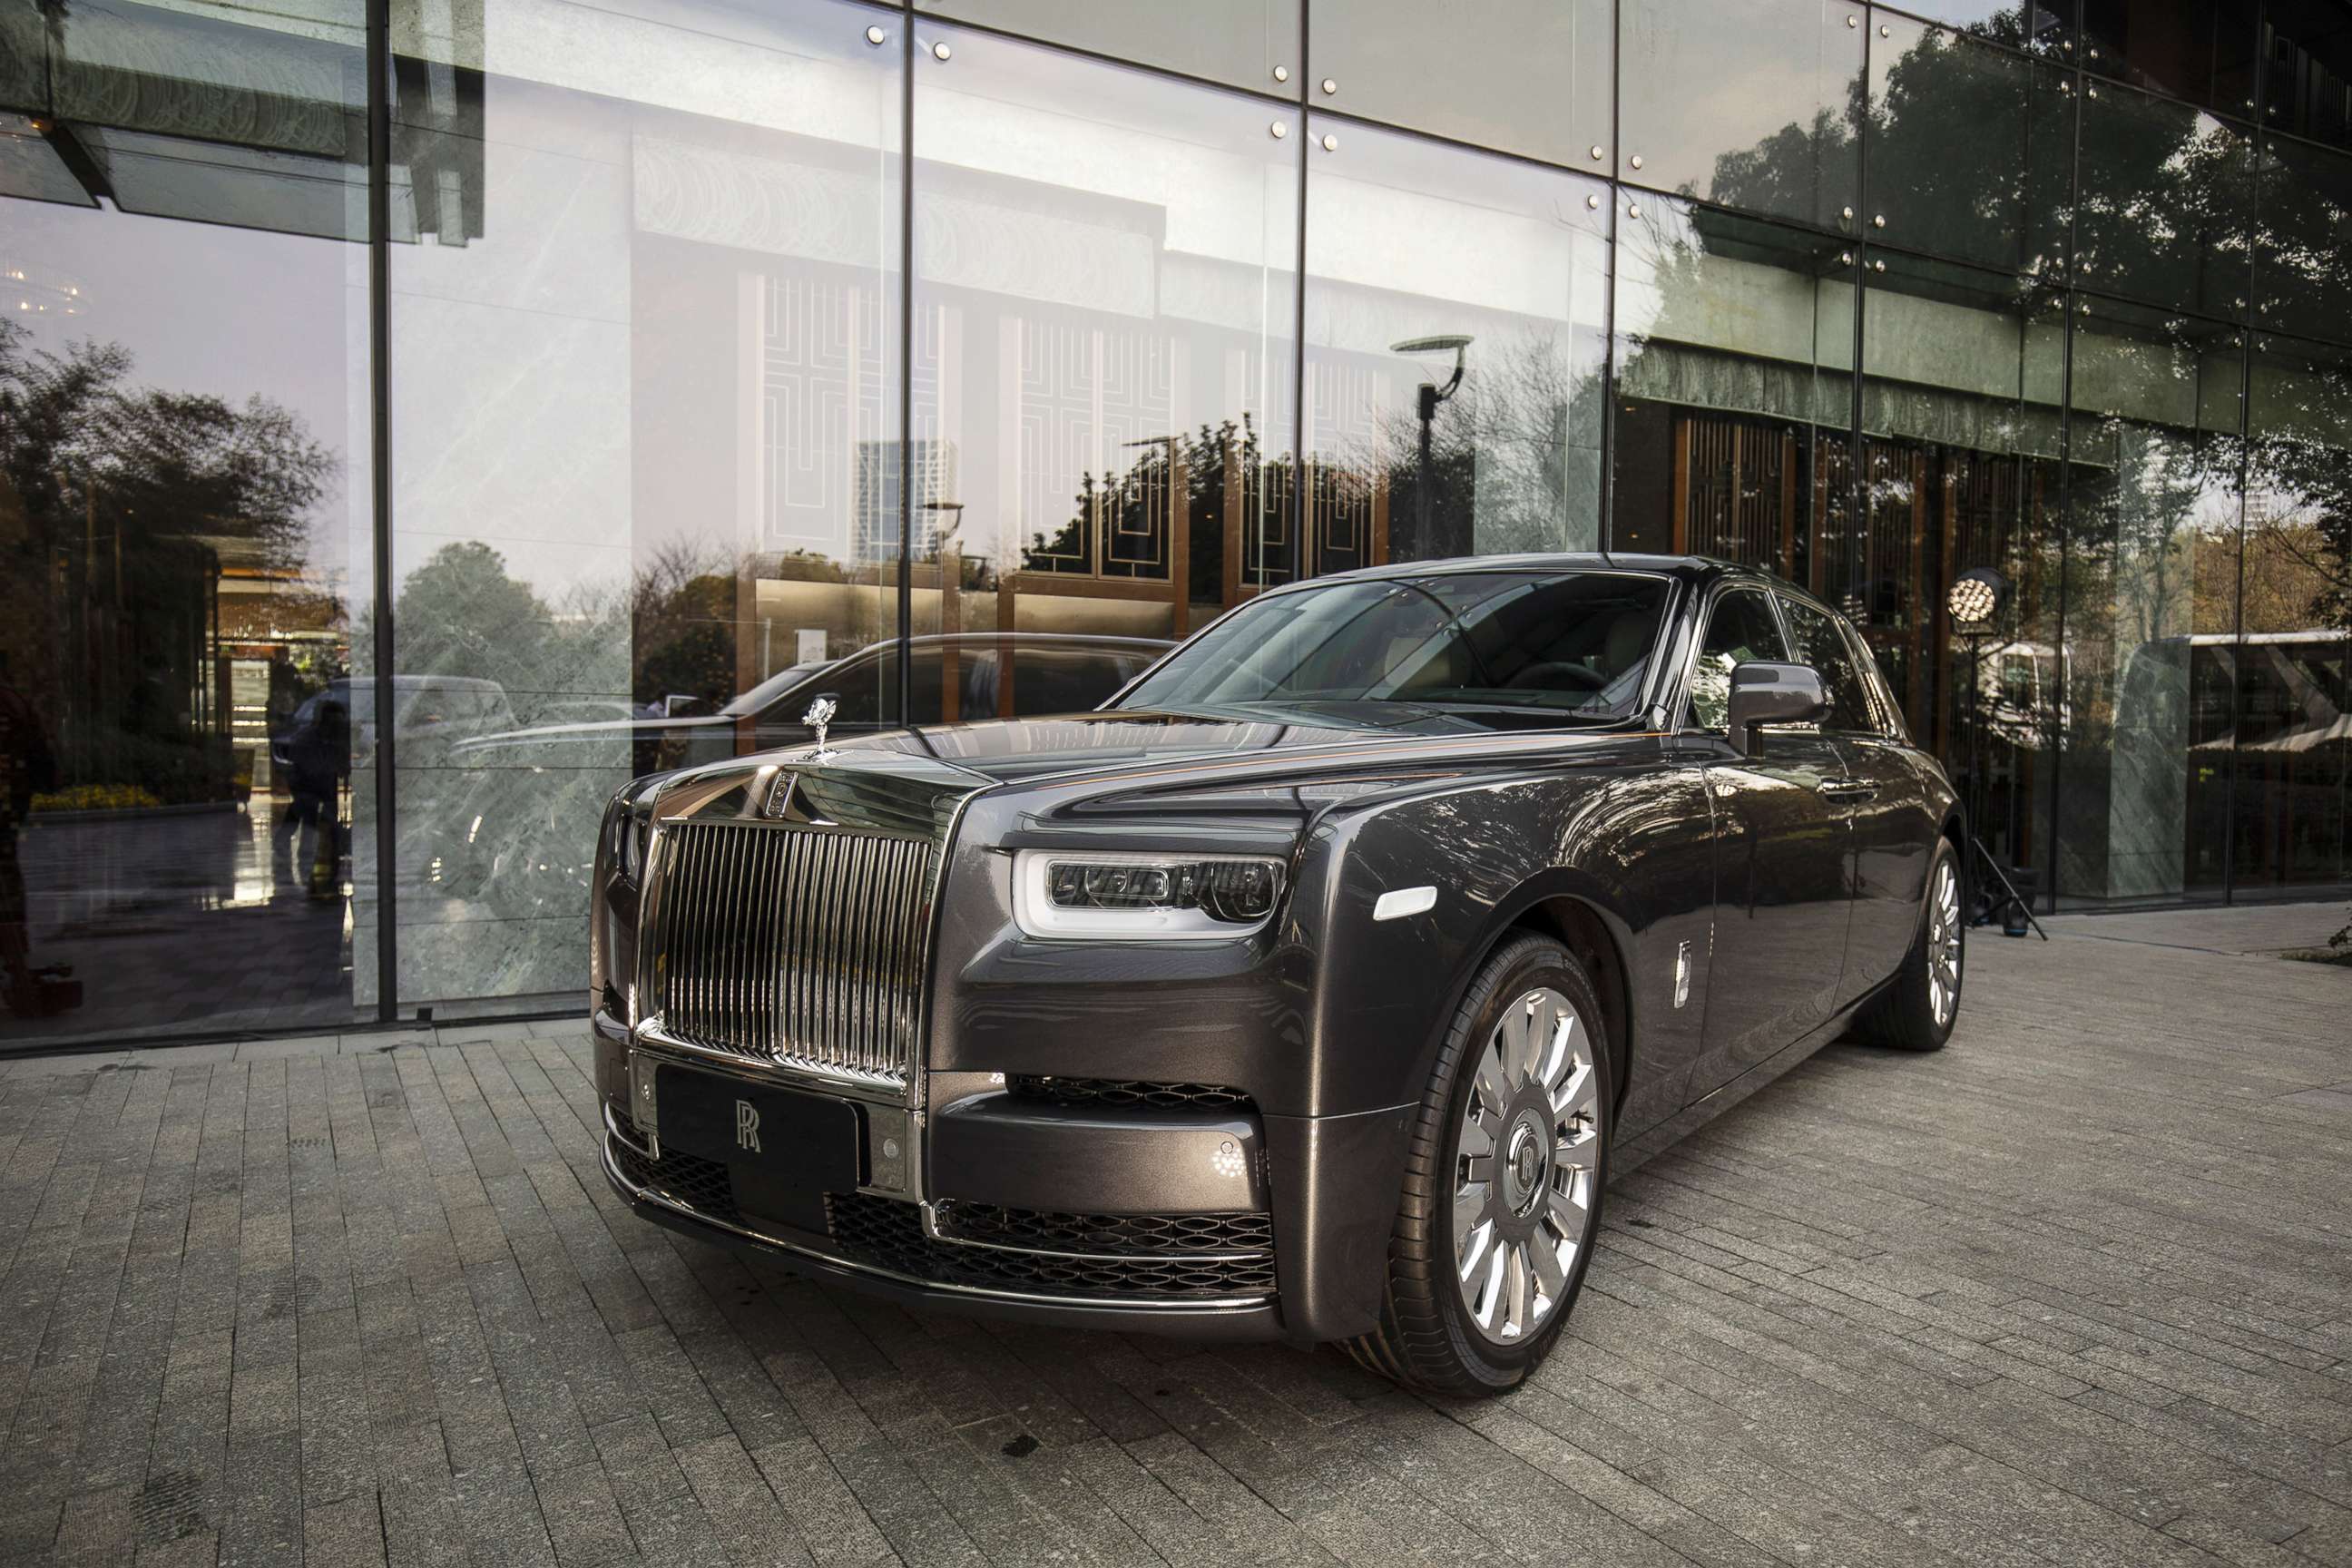 Rolls-Royce introduces hipper, edgier $382,000 SUV for uber-rich young ...